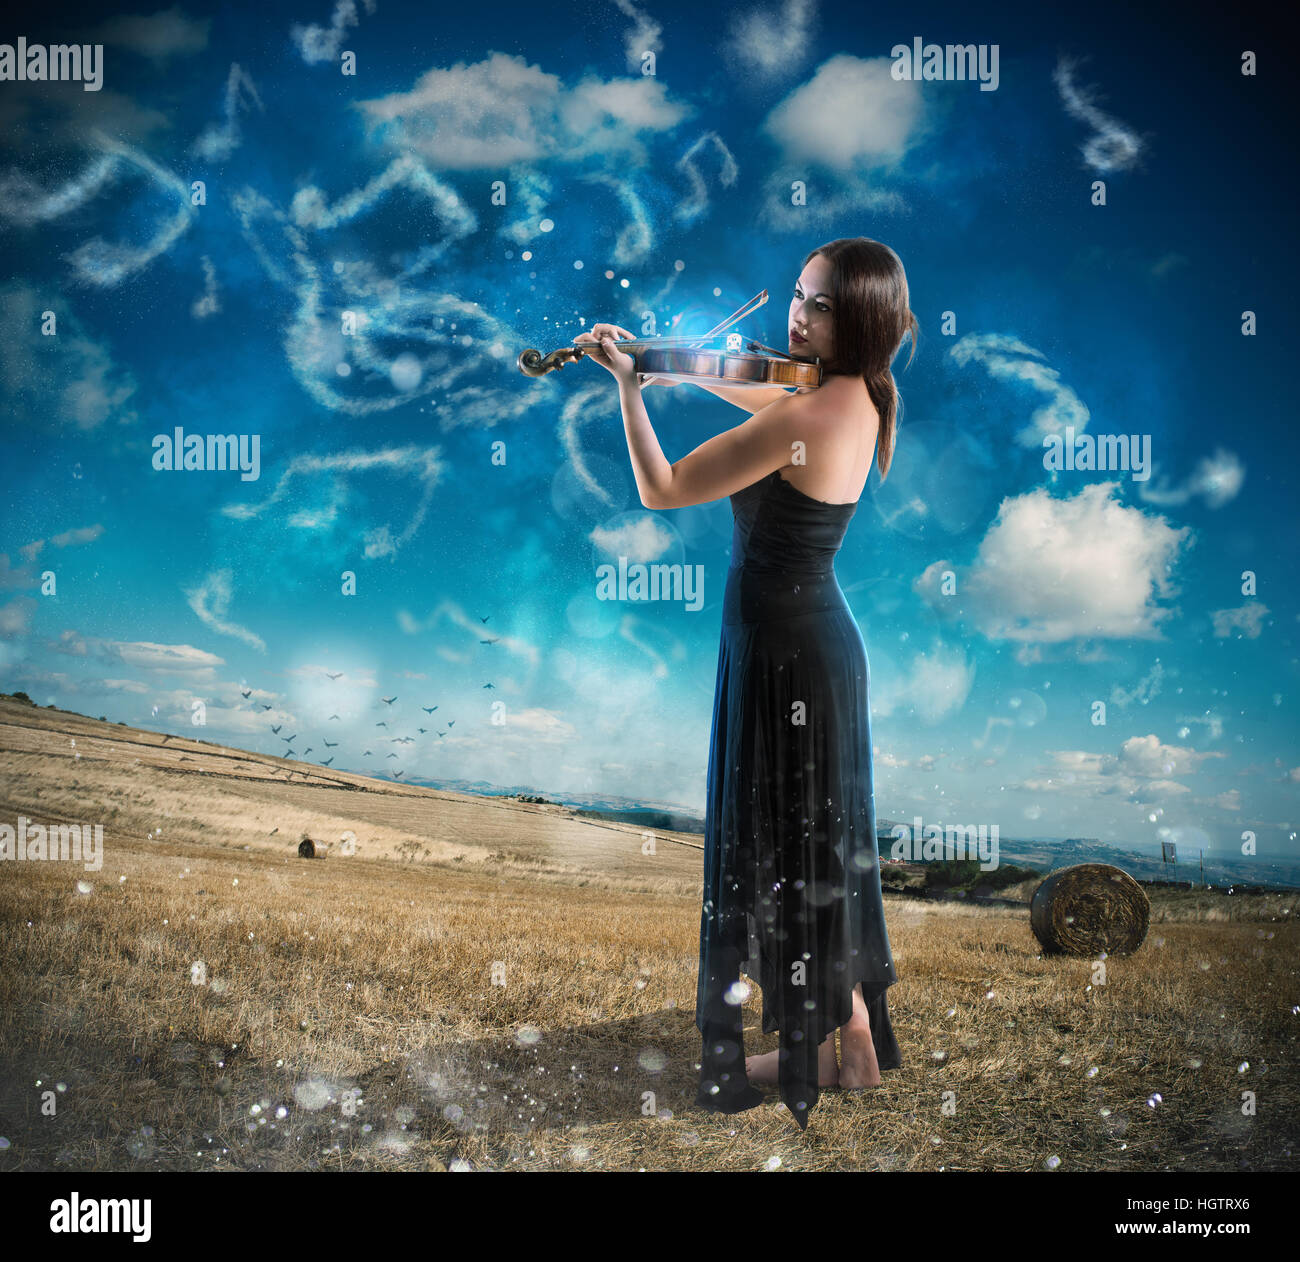 Charming violinist countryside Stock Photo